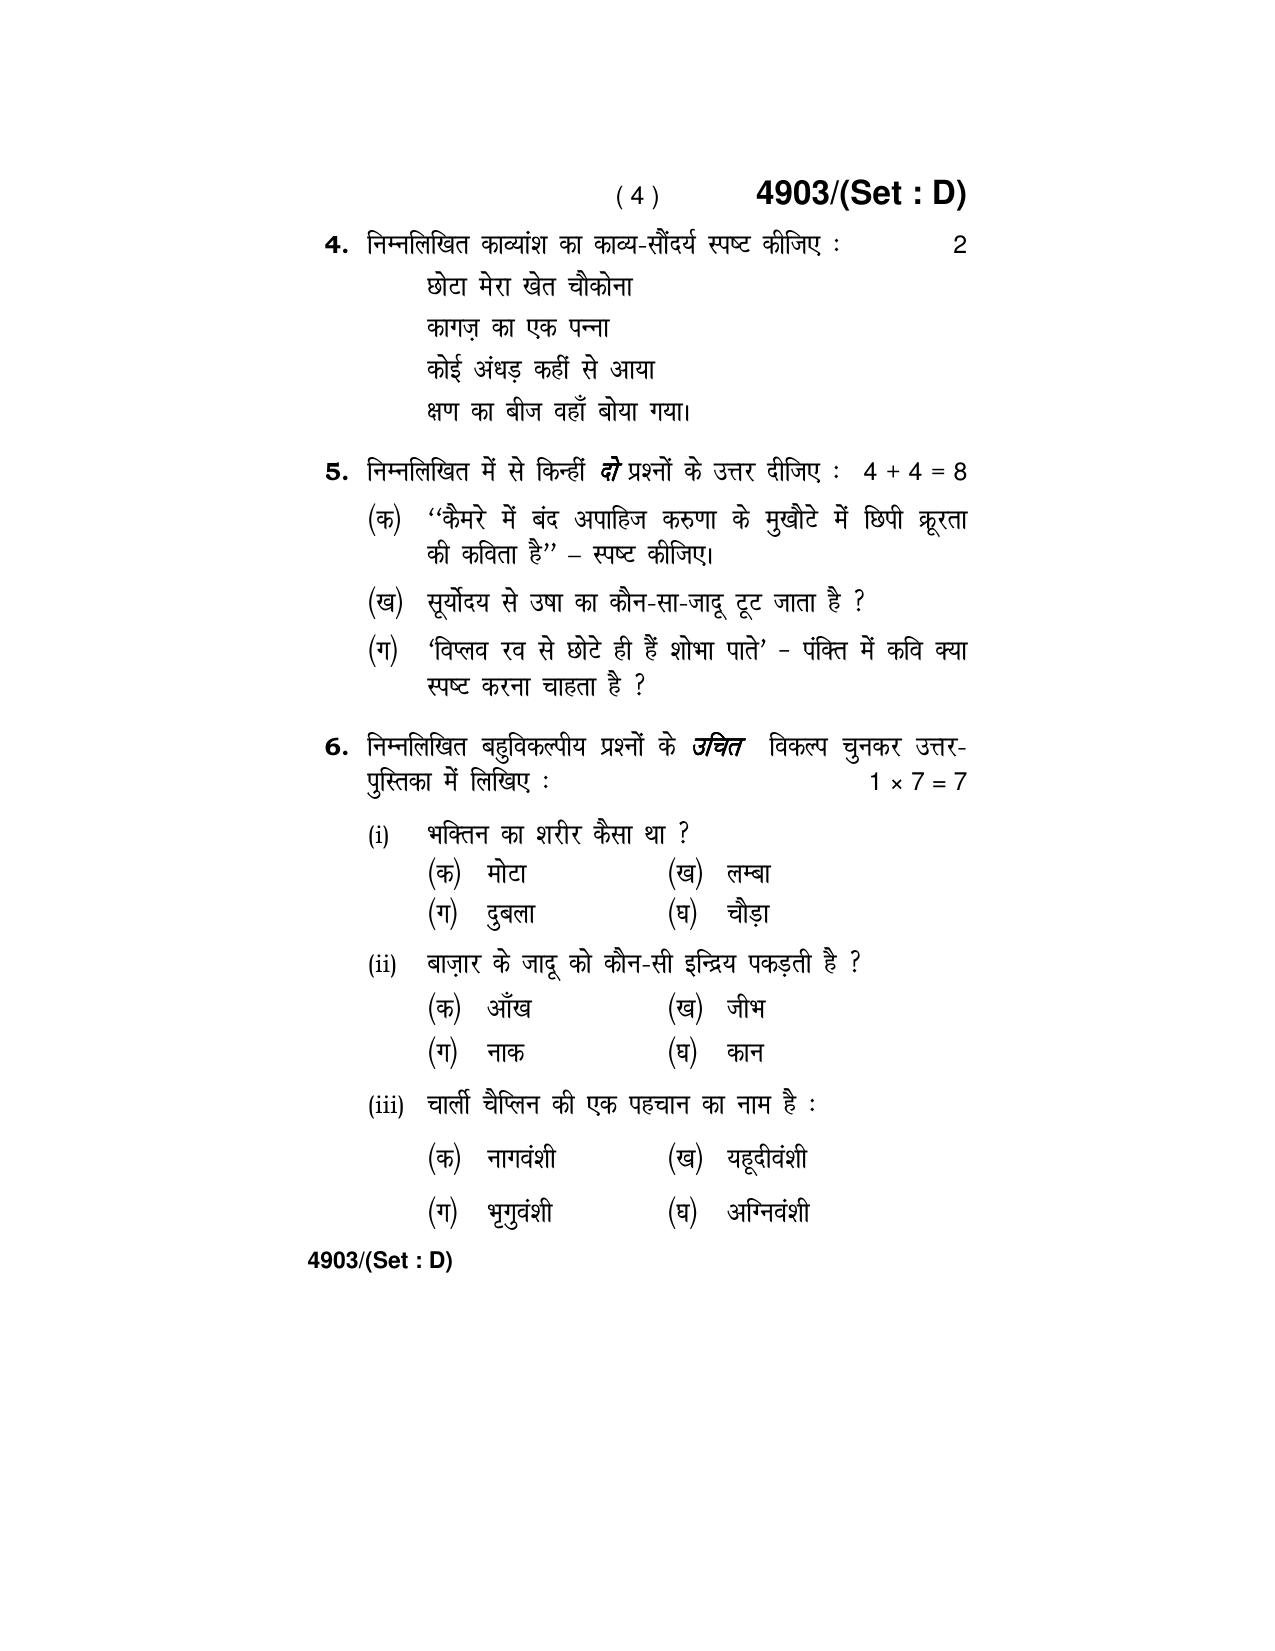 Haryana Board HBSE Class 12 Hindi Core 2020 Question Paper - Page 28